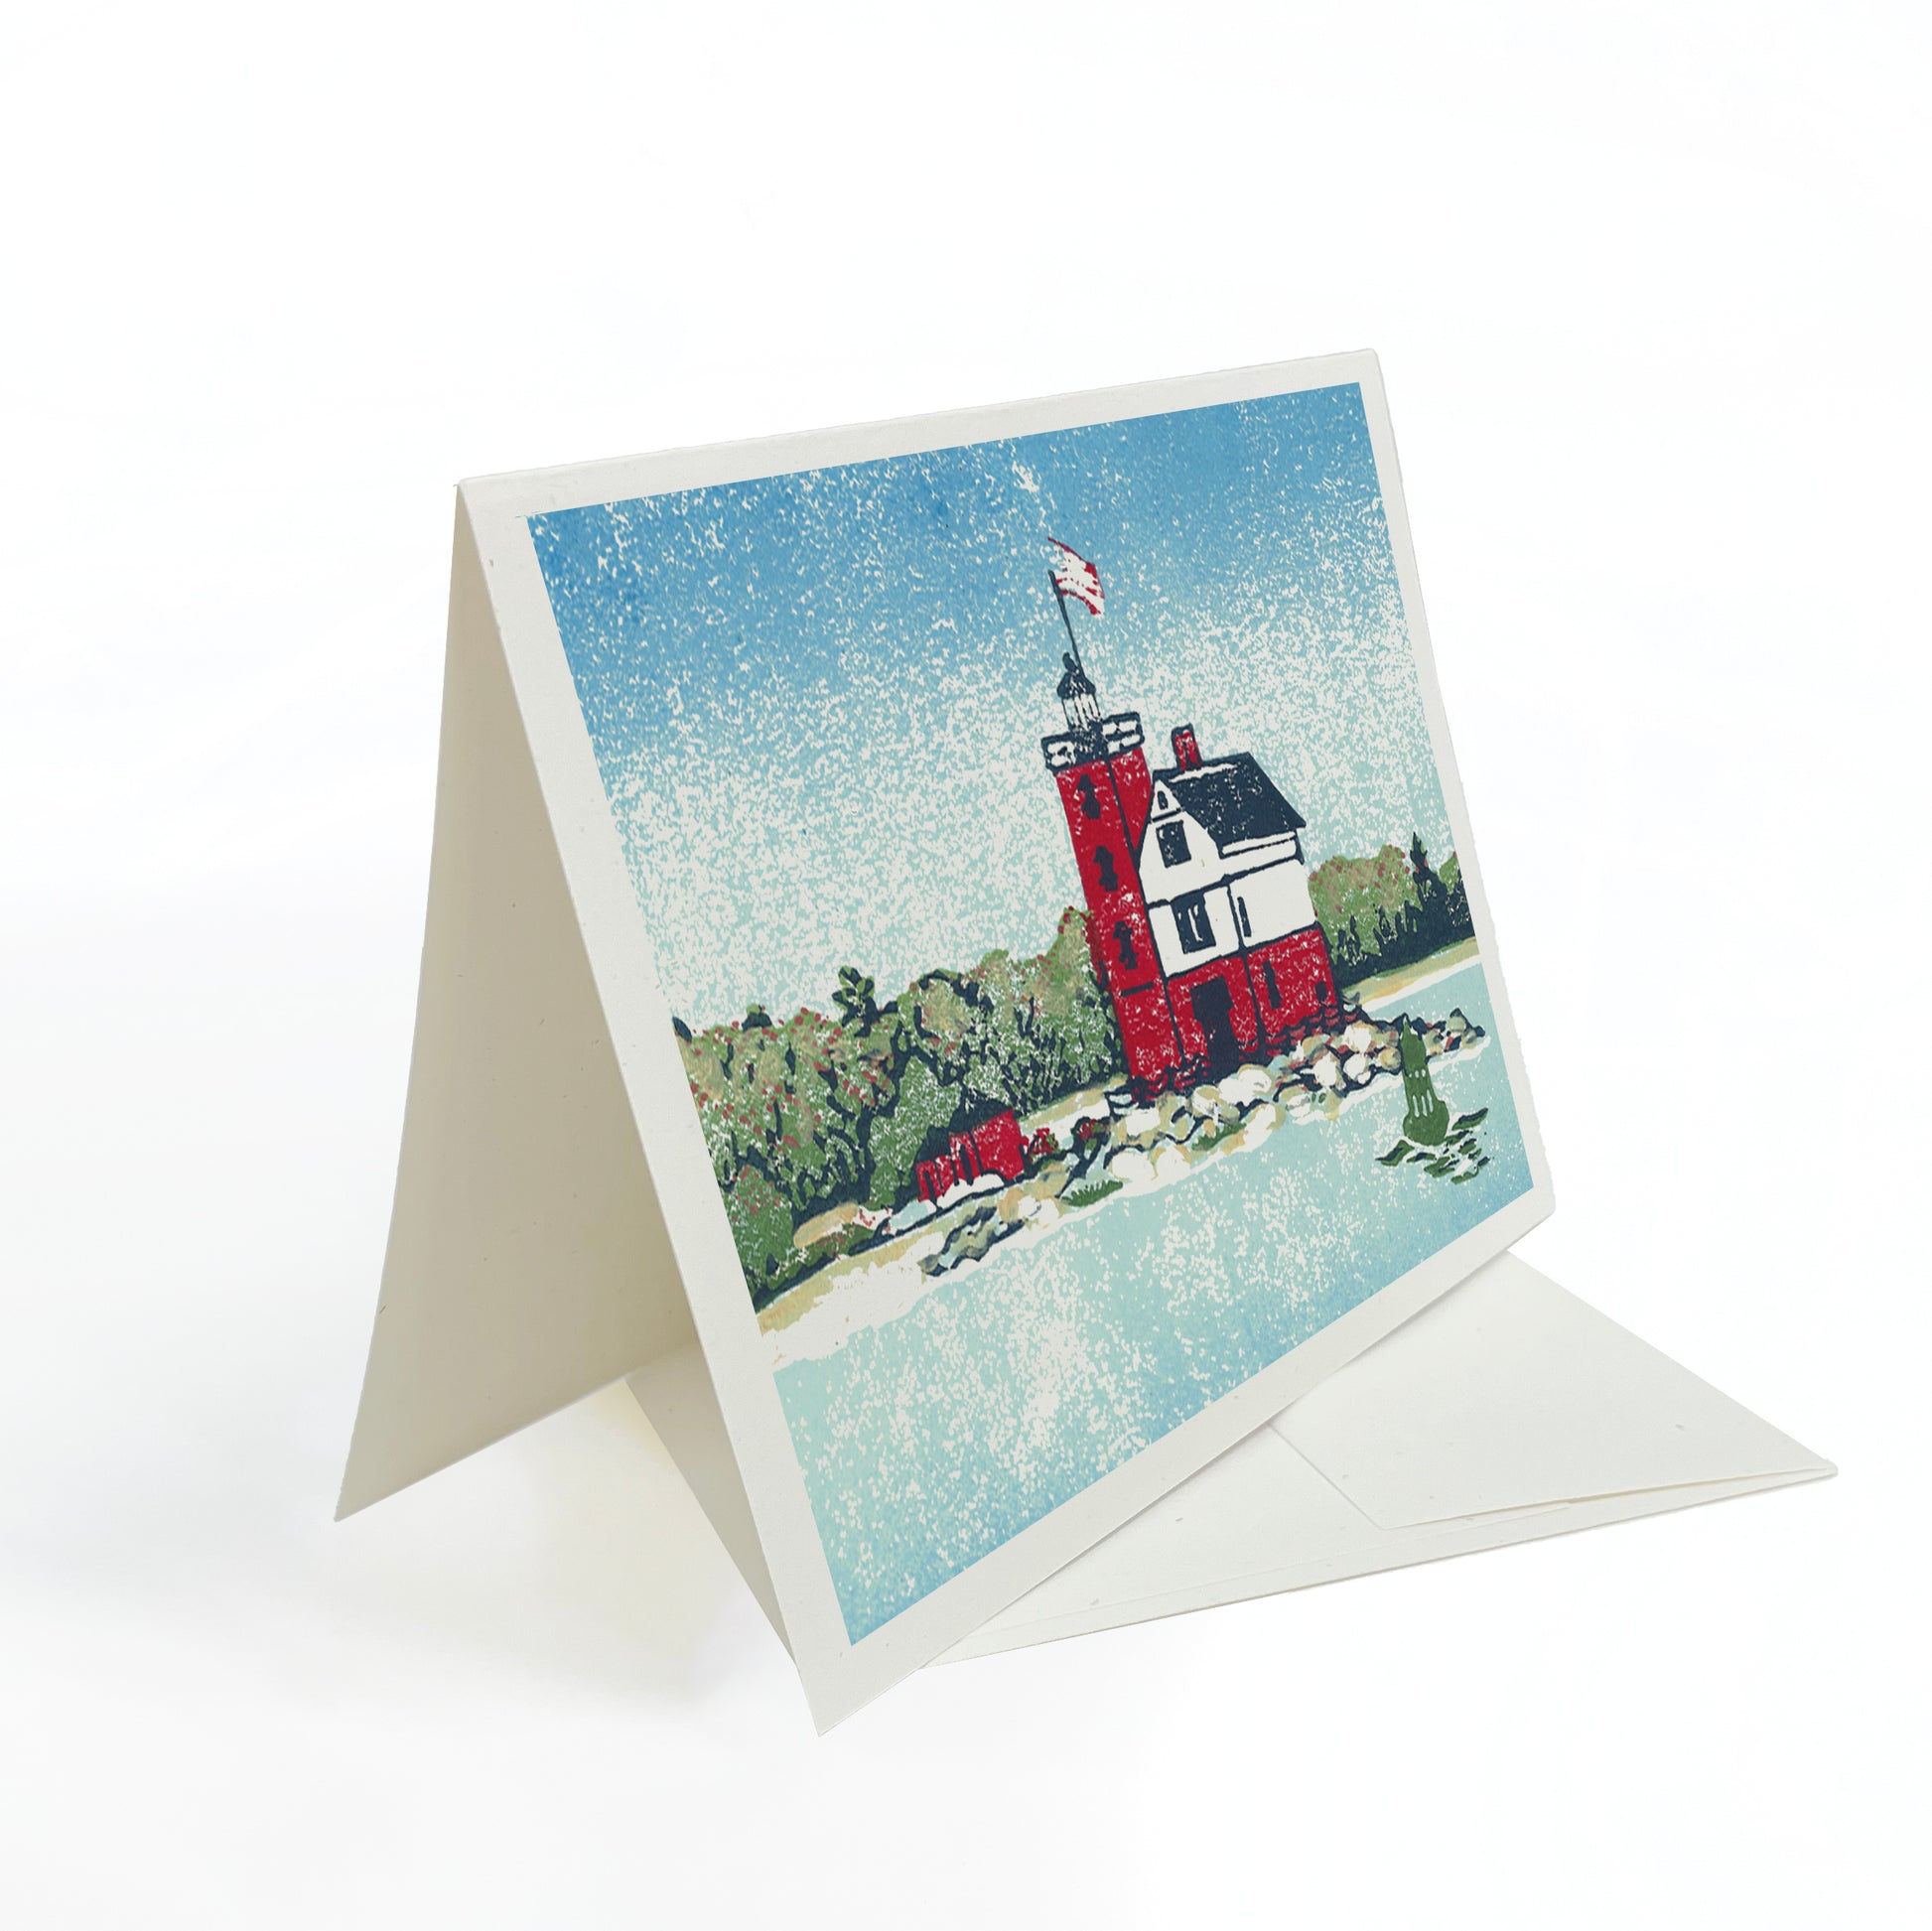 Round Island Light.  A casually elegant card featuring a digital reproduction of Natalia Wohletz’s Peninsula Prints block print design with the same title.